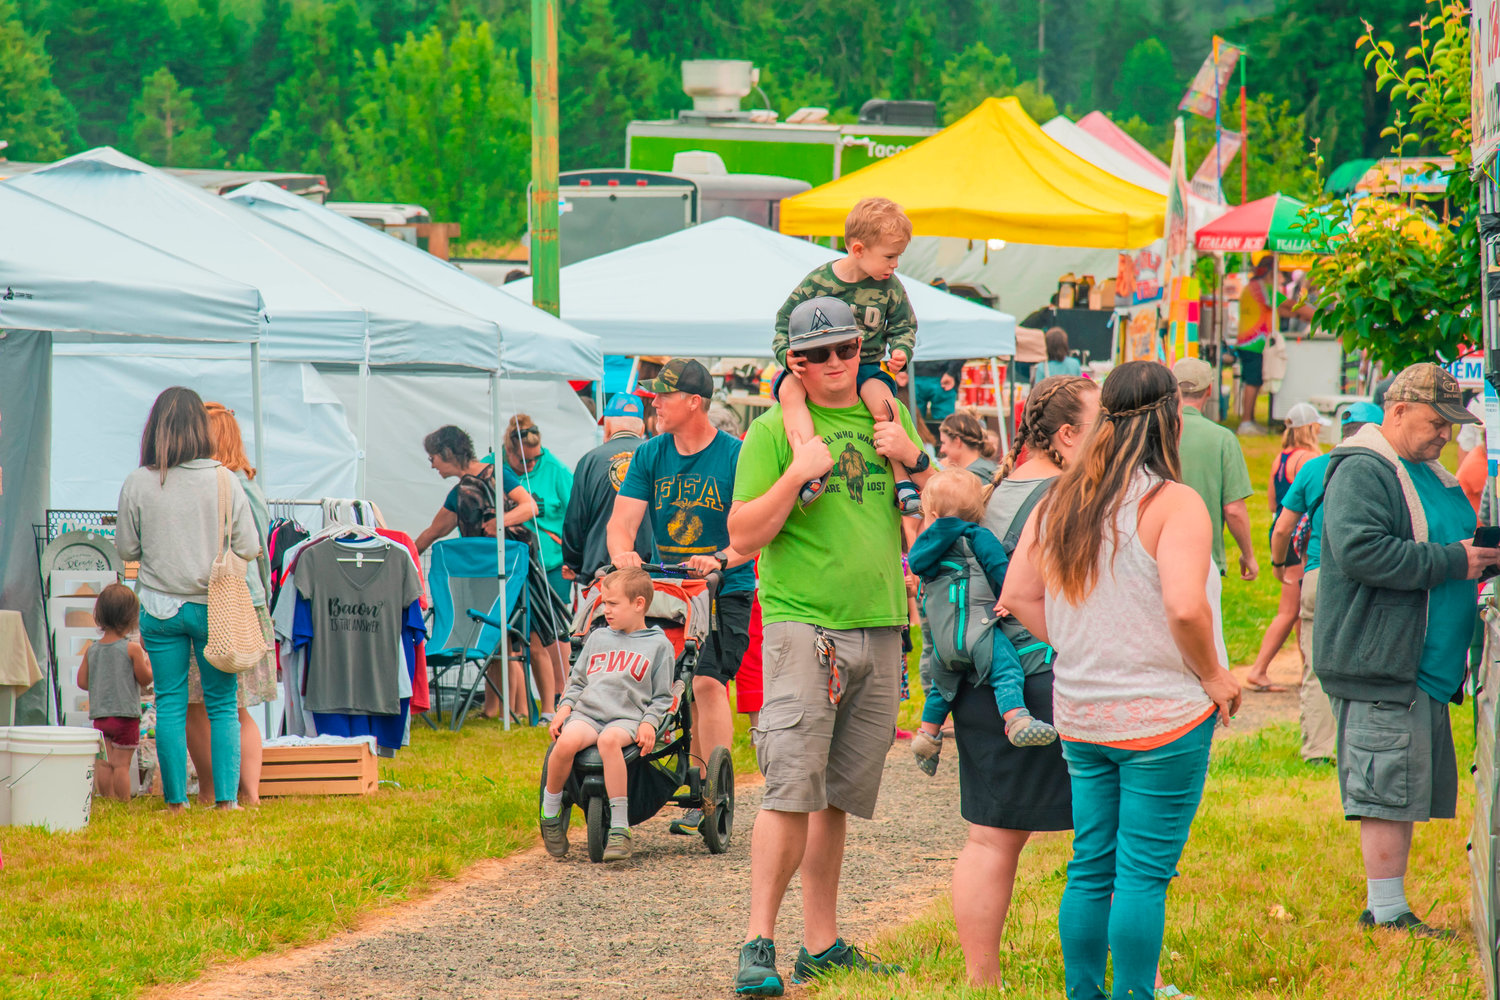 Visitors line up at vendors throughout Klickitat Prairie Park in Mossyrock during Freedom Festival celebrations on Saturday.